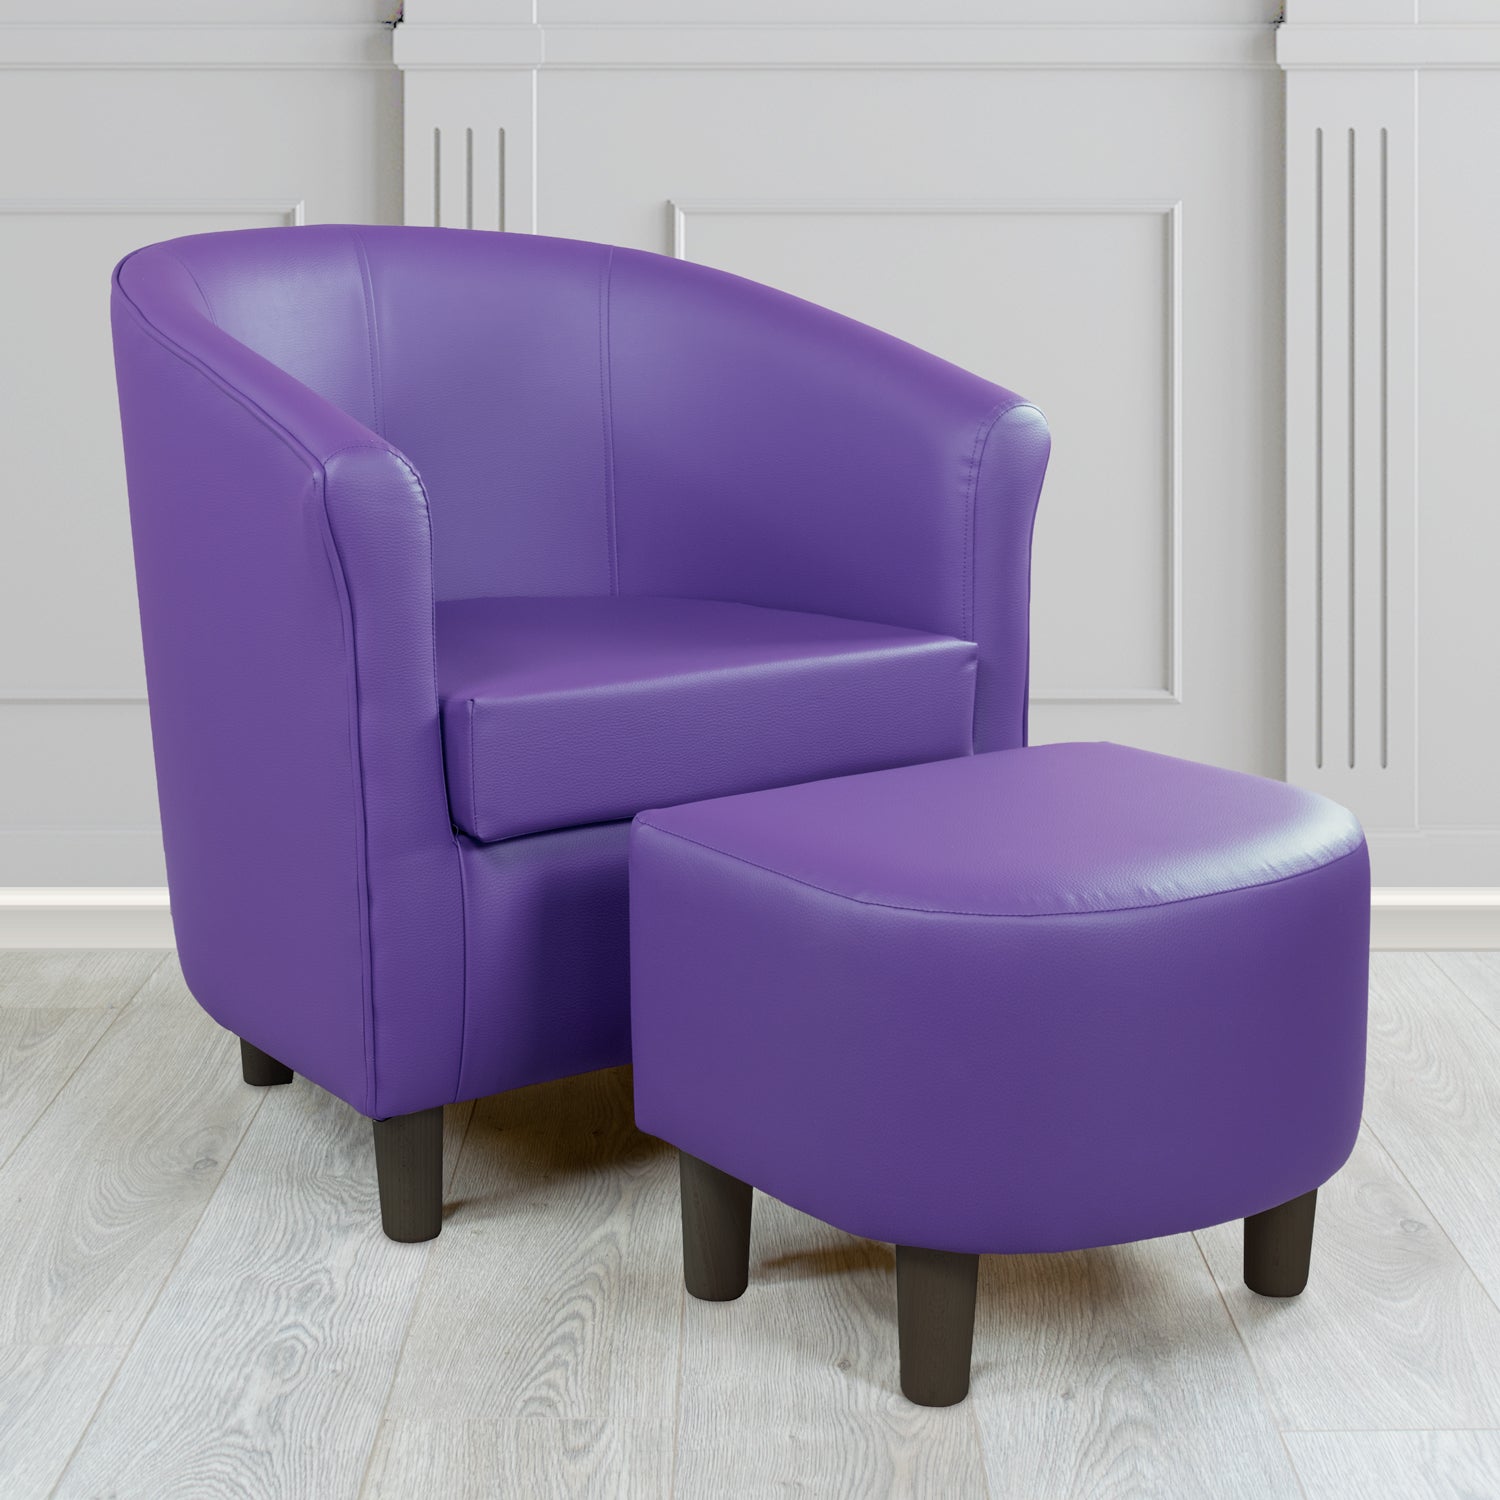 Tuscany Just Colour Ultraviolet Faux Leather Tub Chair with Footstool Set - The Tub Chair Shop